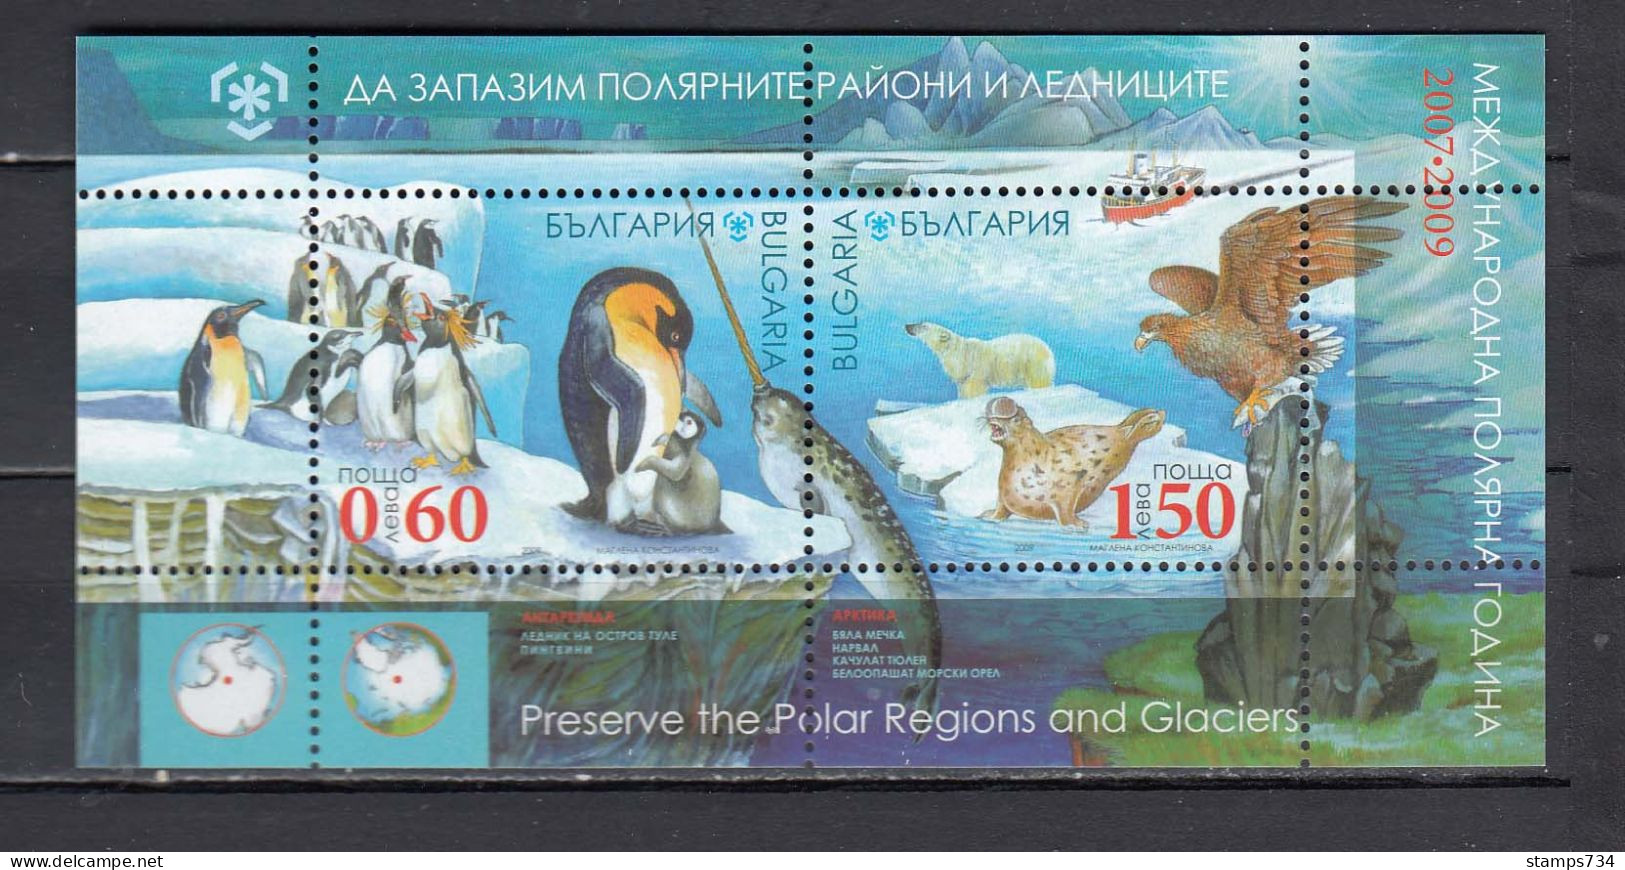 Bulgaria 2009 - International Campaign To Protect Polar Regions And Glaciers, Mi-Nr. Bl. 310, MNH** - Unused Stamps